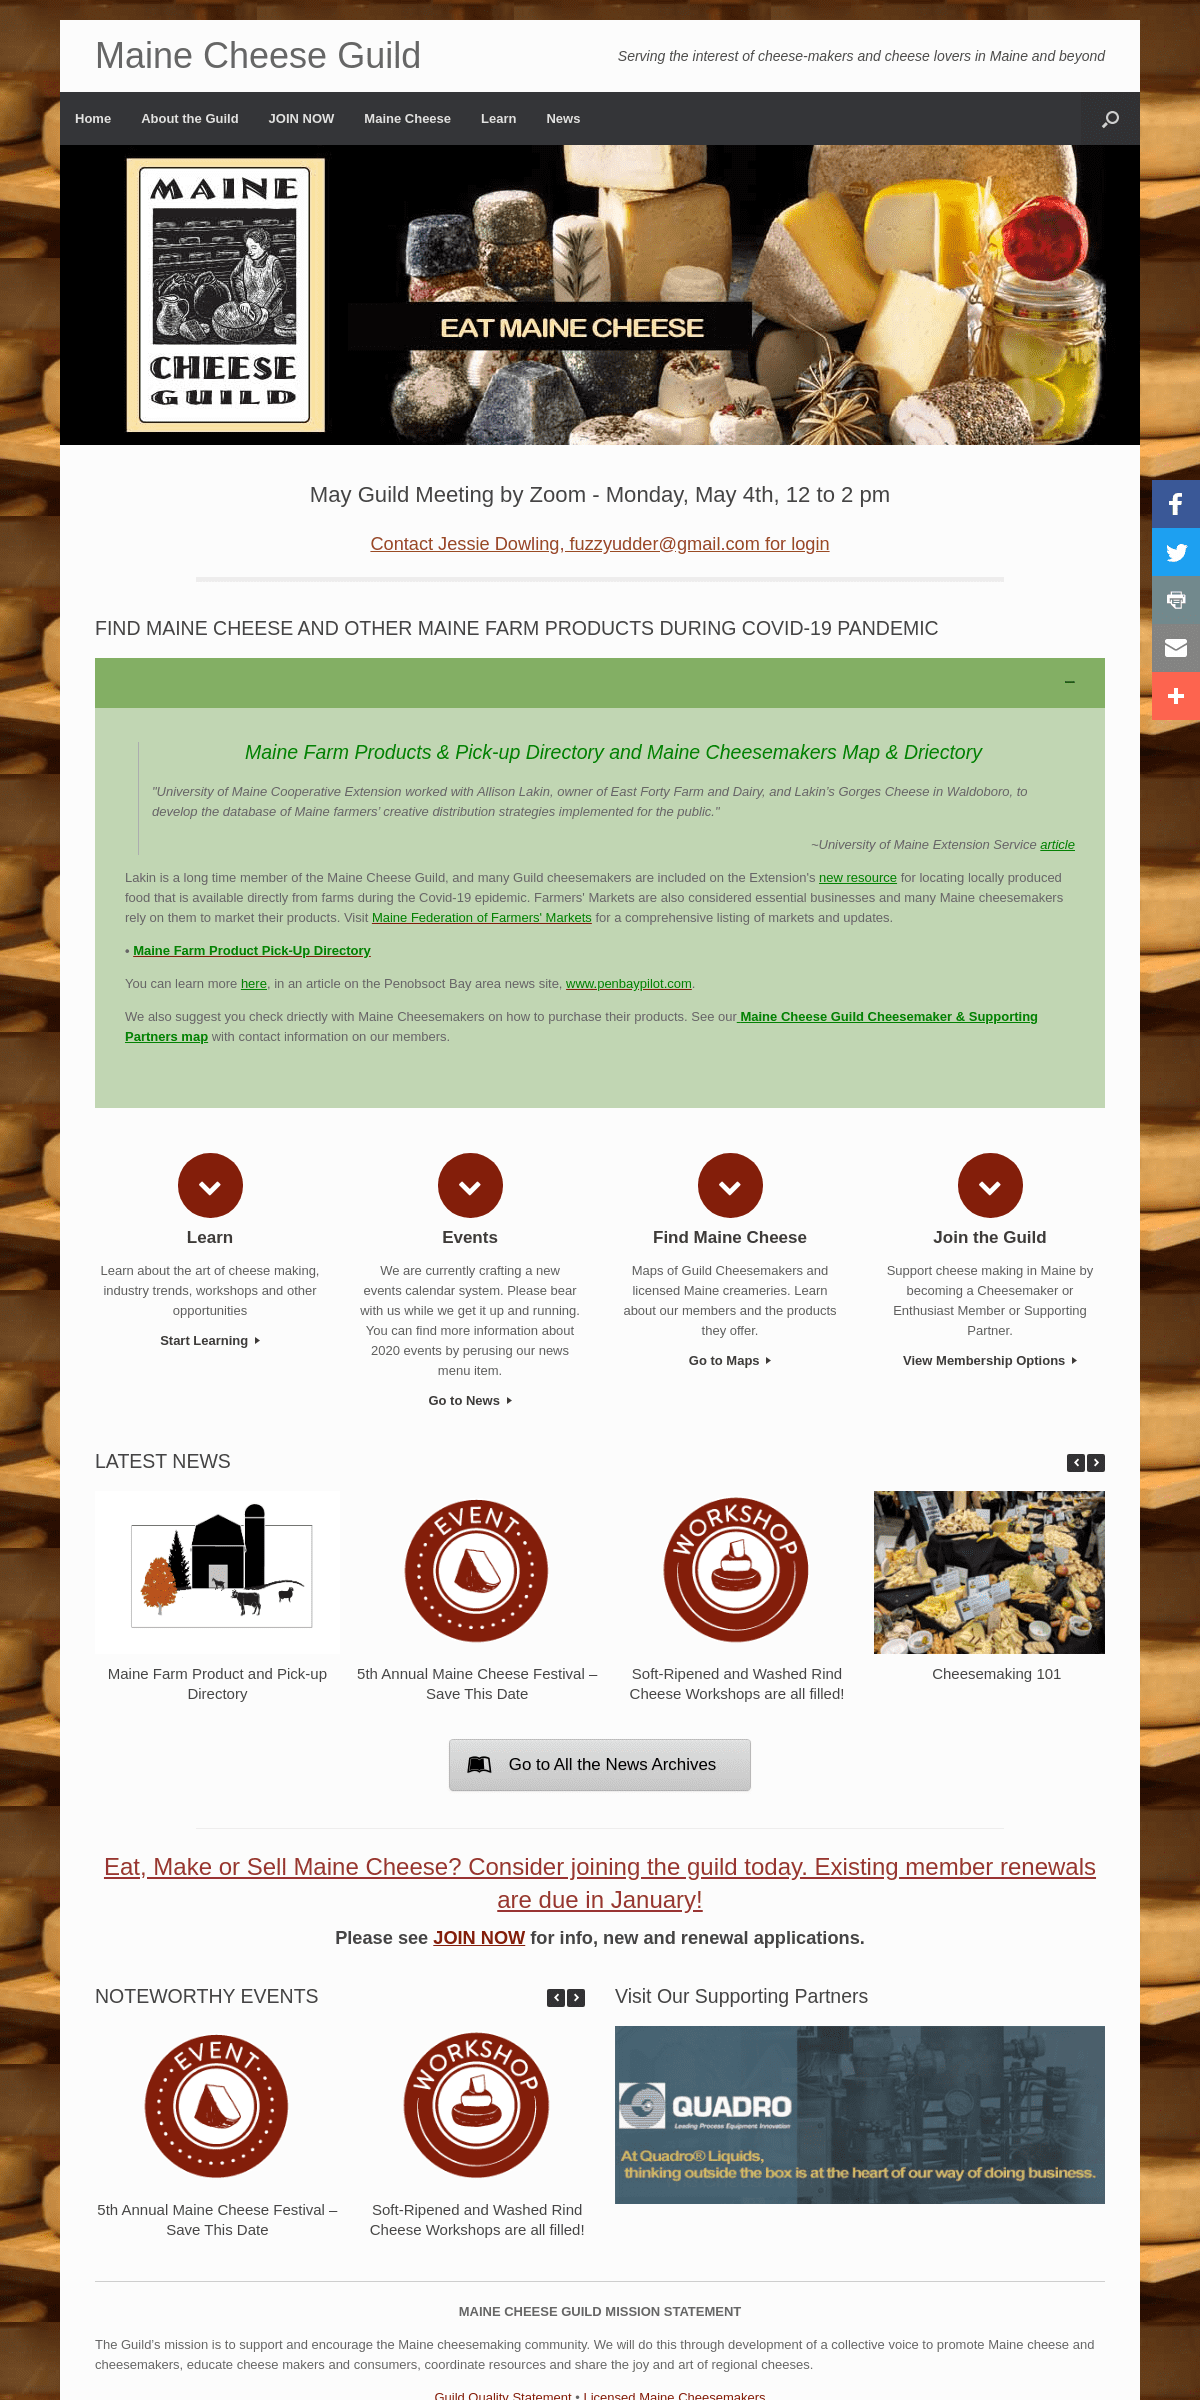 A complete backup of mainecheeseguild.org